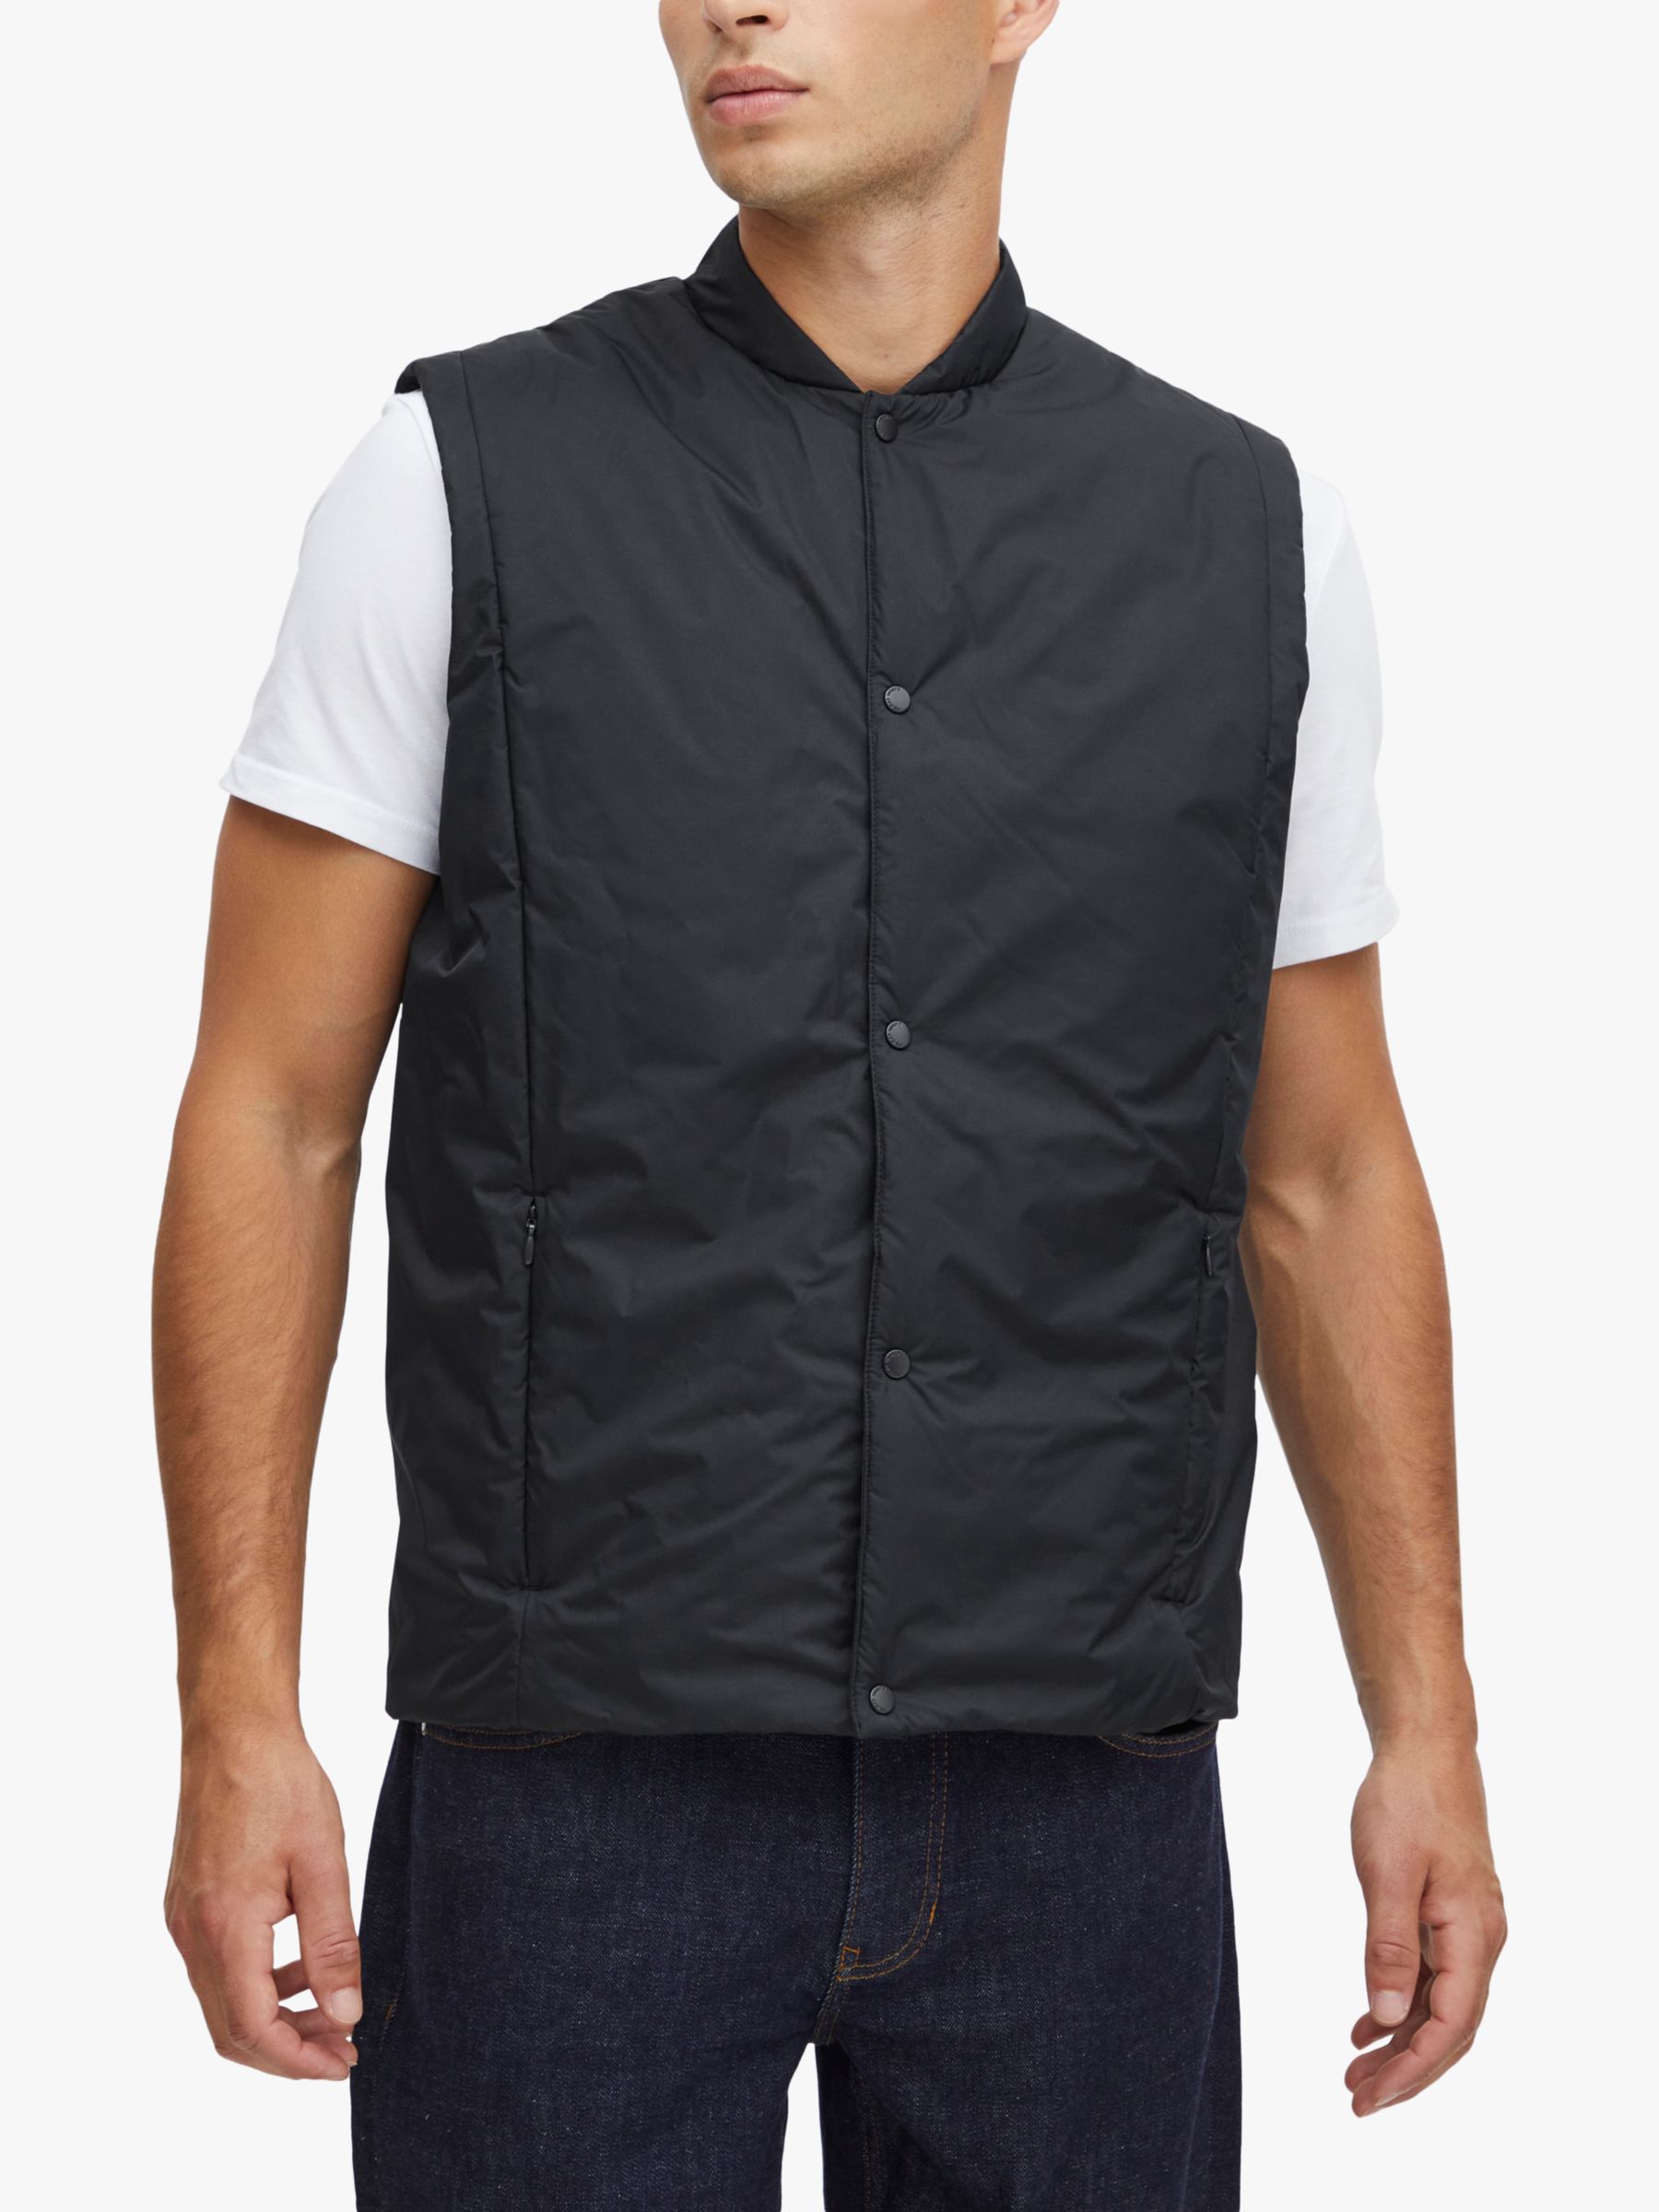 Casual Friday Oates Thinsulate Gilet, Dark Navy, S